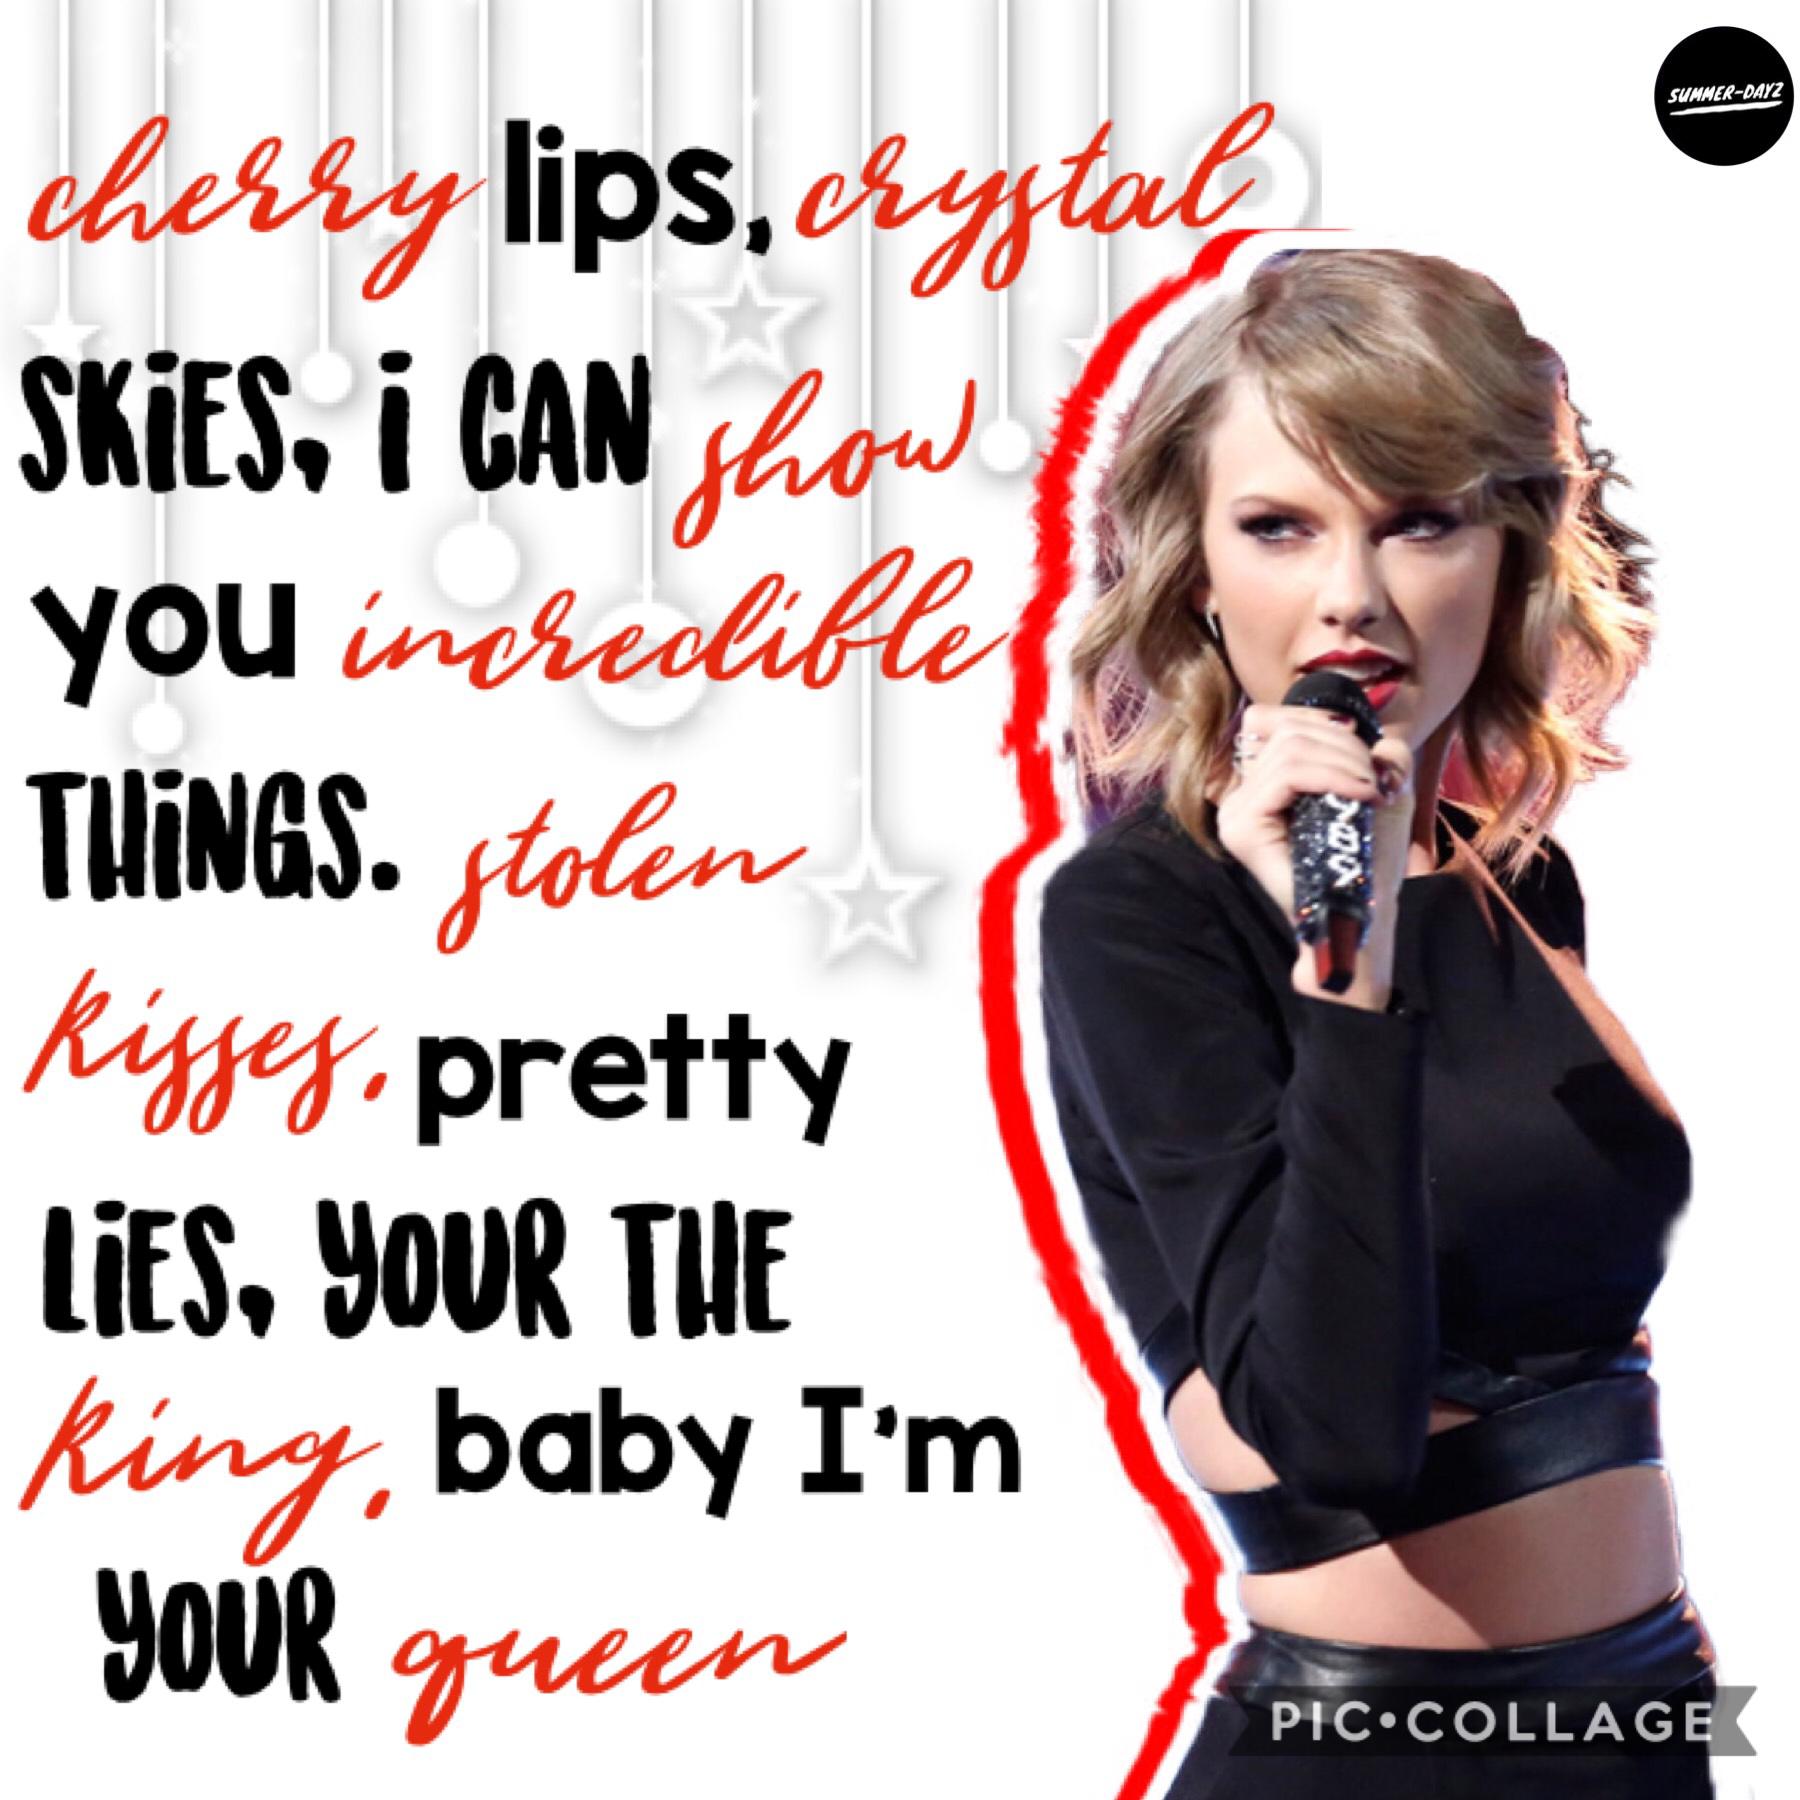 Tappedy Tap Tap♥️🐍
This was an entry to a games I’m in. I feel like it’s kinda plain and theres too many words. But idk, maybe not. I do rlly like the pic I found of her lol. It’s like she’s looking at the words😆 I hope you all are doing well♥️ QOTD: what